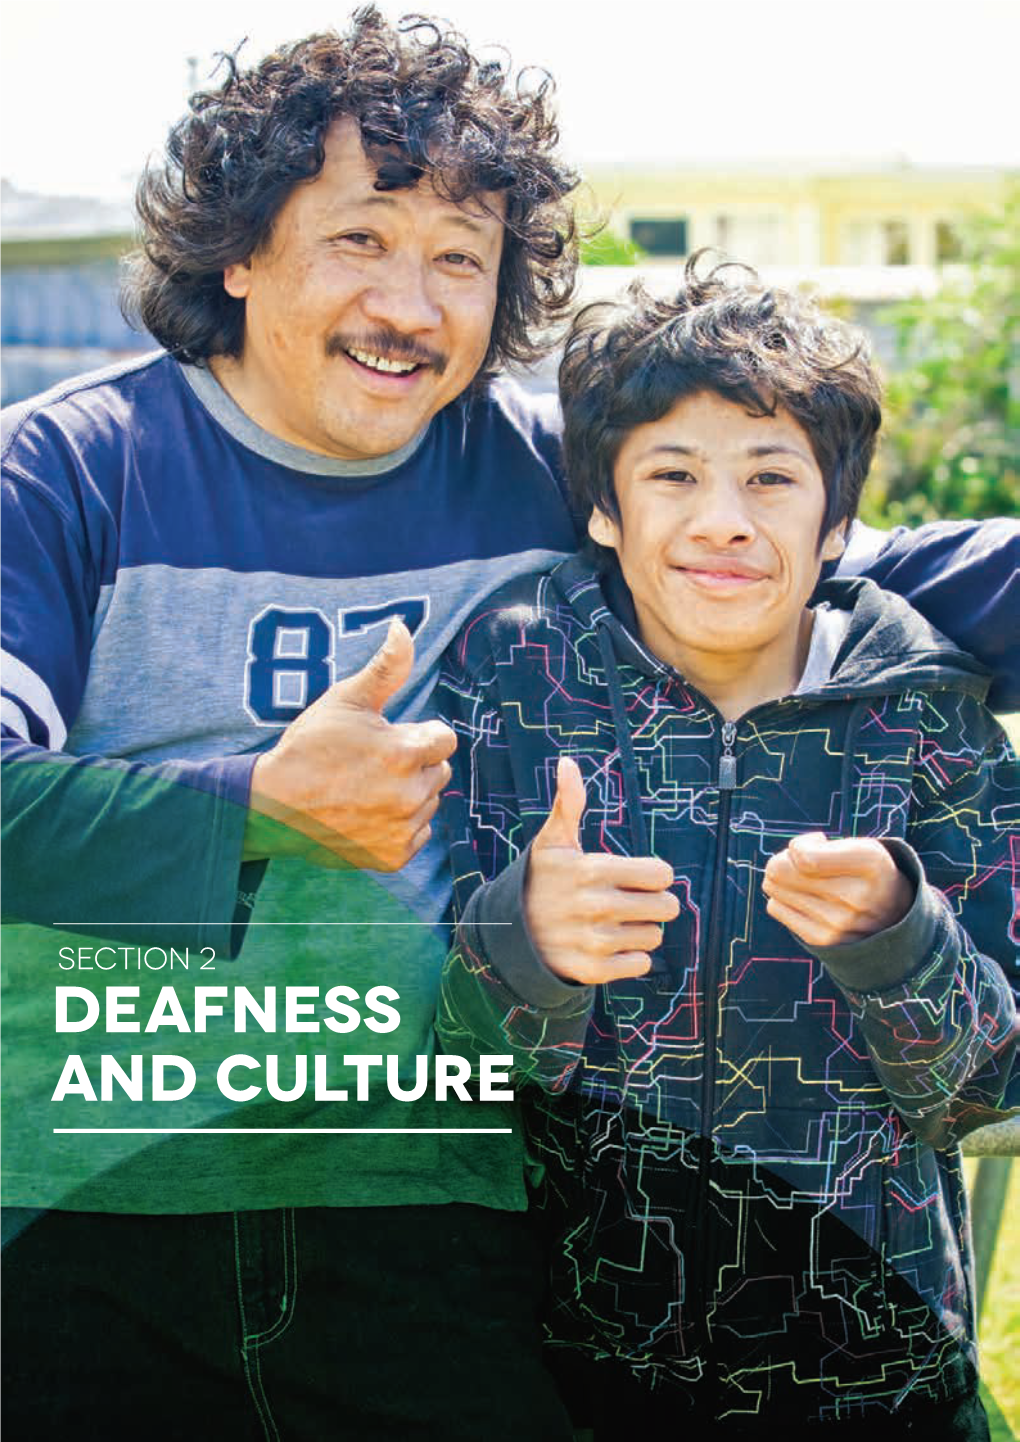 The Family Book Section 2 Deafness and Culture